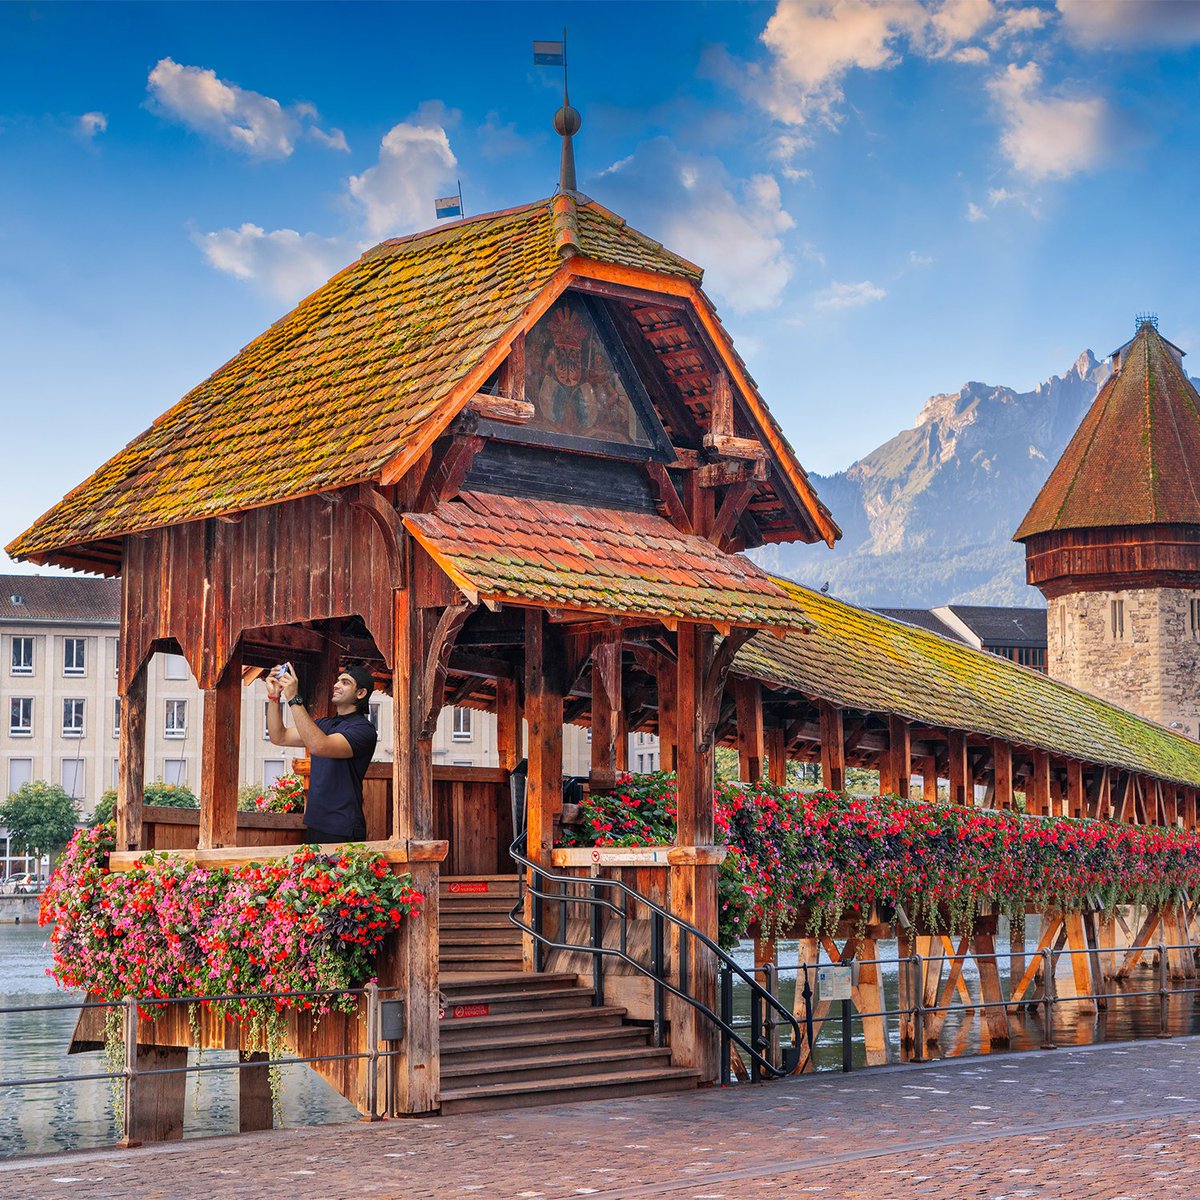 Step into Lucerne's Old Town – where every corner tells a story, discover its rich culture and timeless charm!  📍@visitlucerne @Neeraj_chopra1 #INeedSwitzerland #CityHistory #TouristSpots